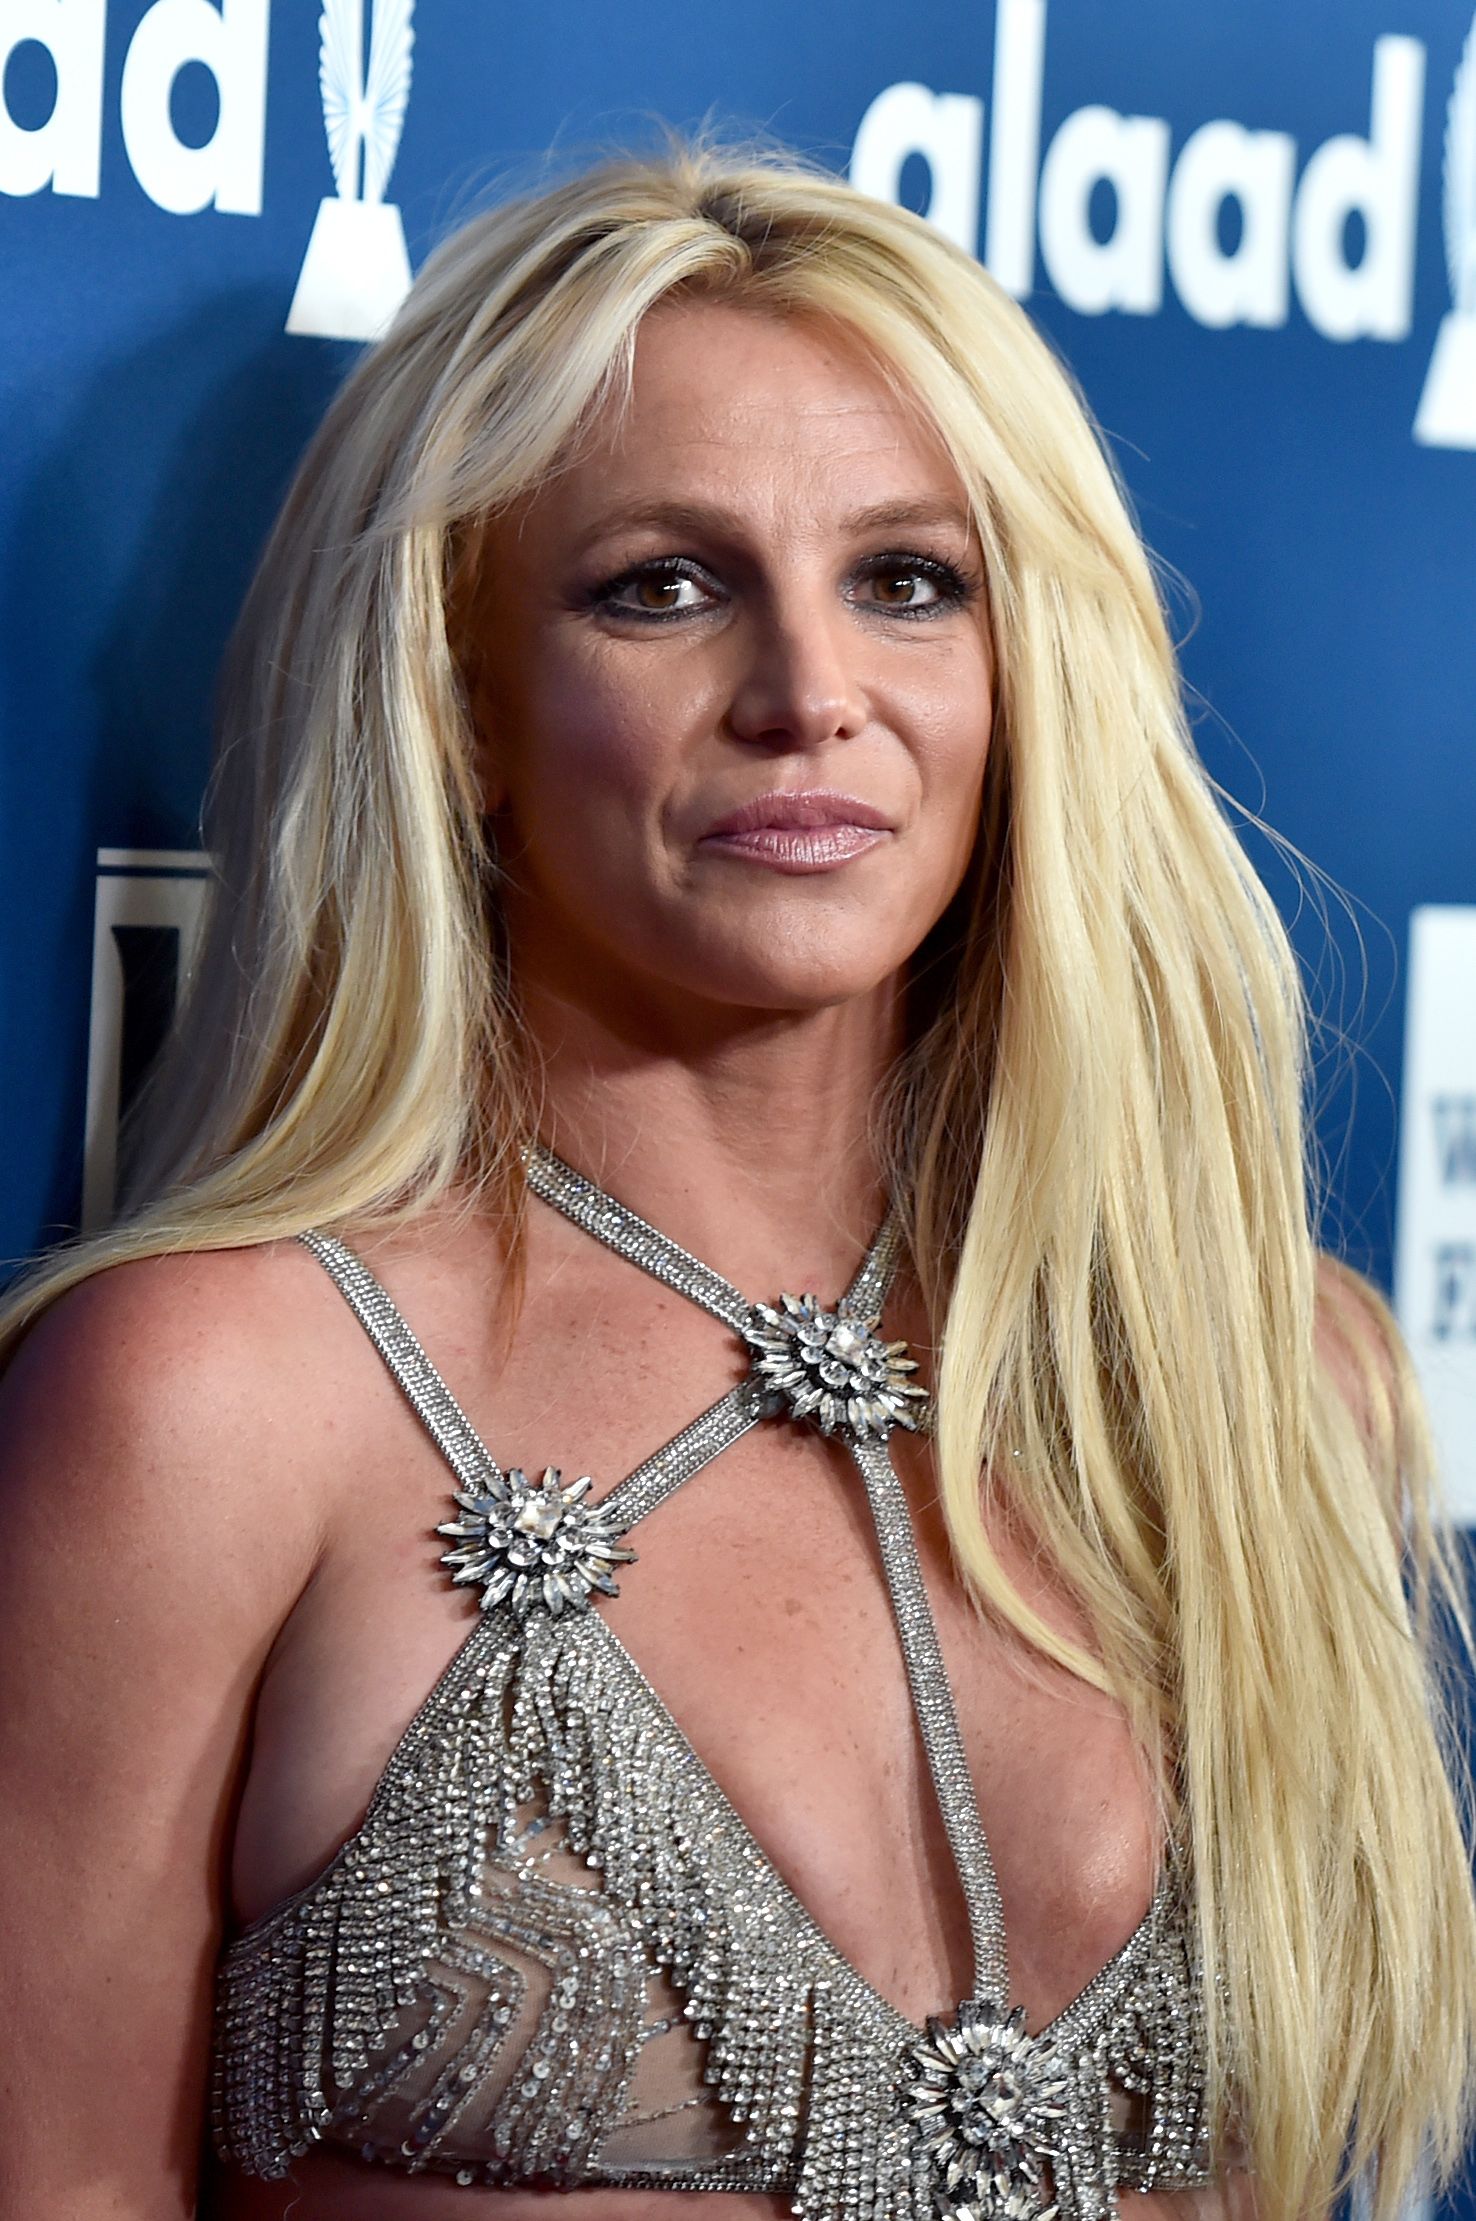 Britney Spears at the 29th Annual GLAAD Media Awards at The Beverly Hilton Hotel in Beverly Hills, California | Photo: Alberto E. Rodriguez/Getty Images